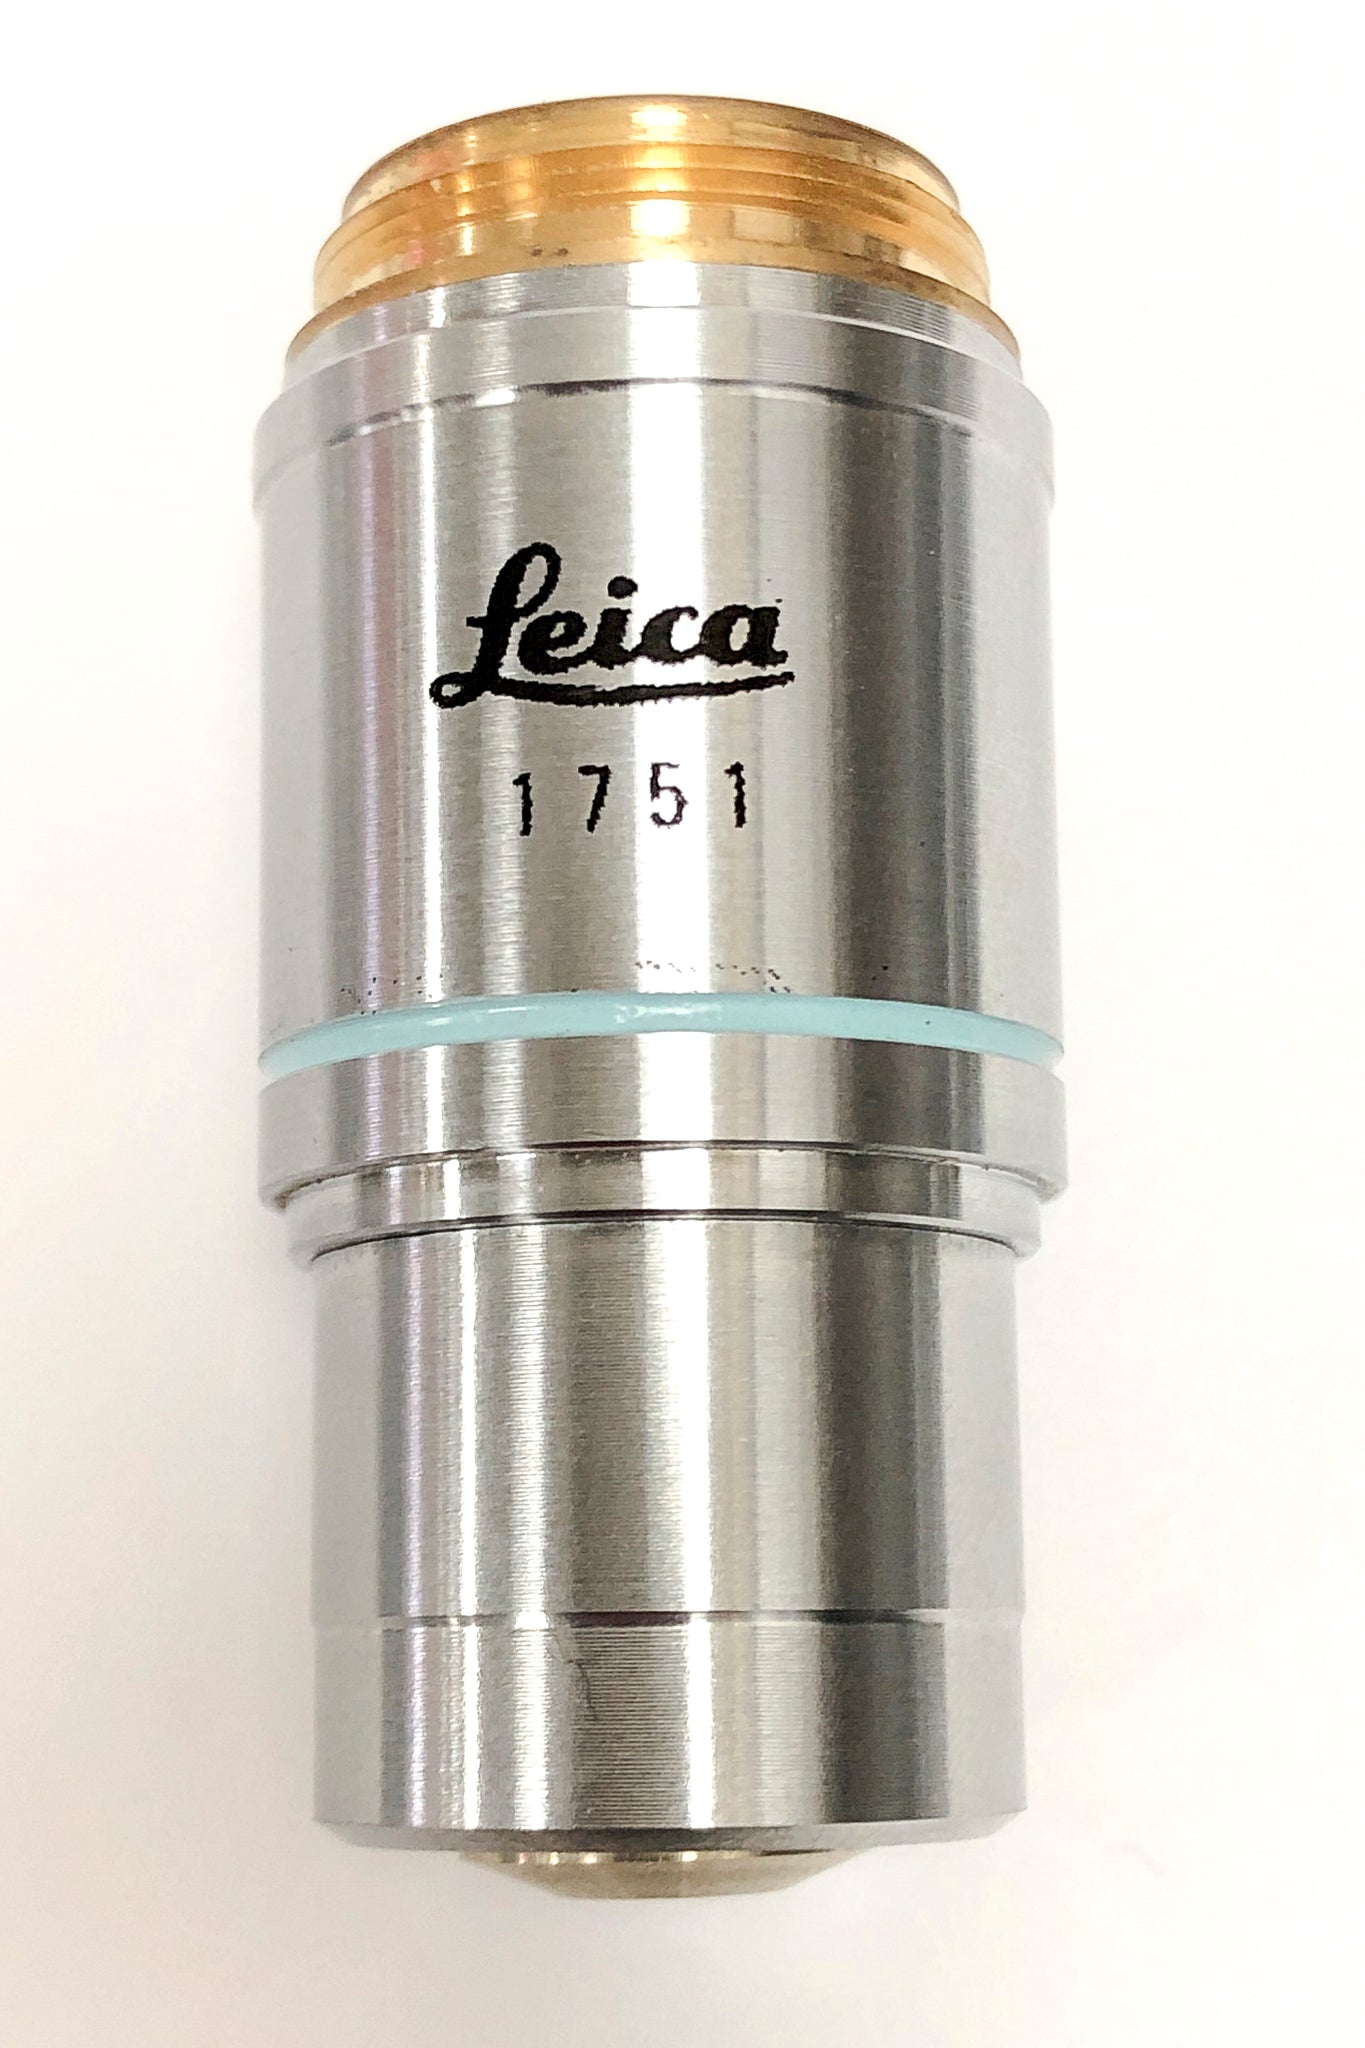 Leica 40x Plan Achromat Phase Contrast Objective #13175100 for ATC 2000